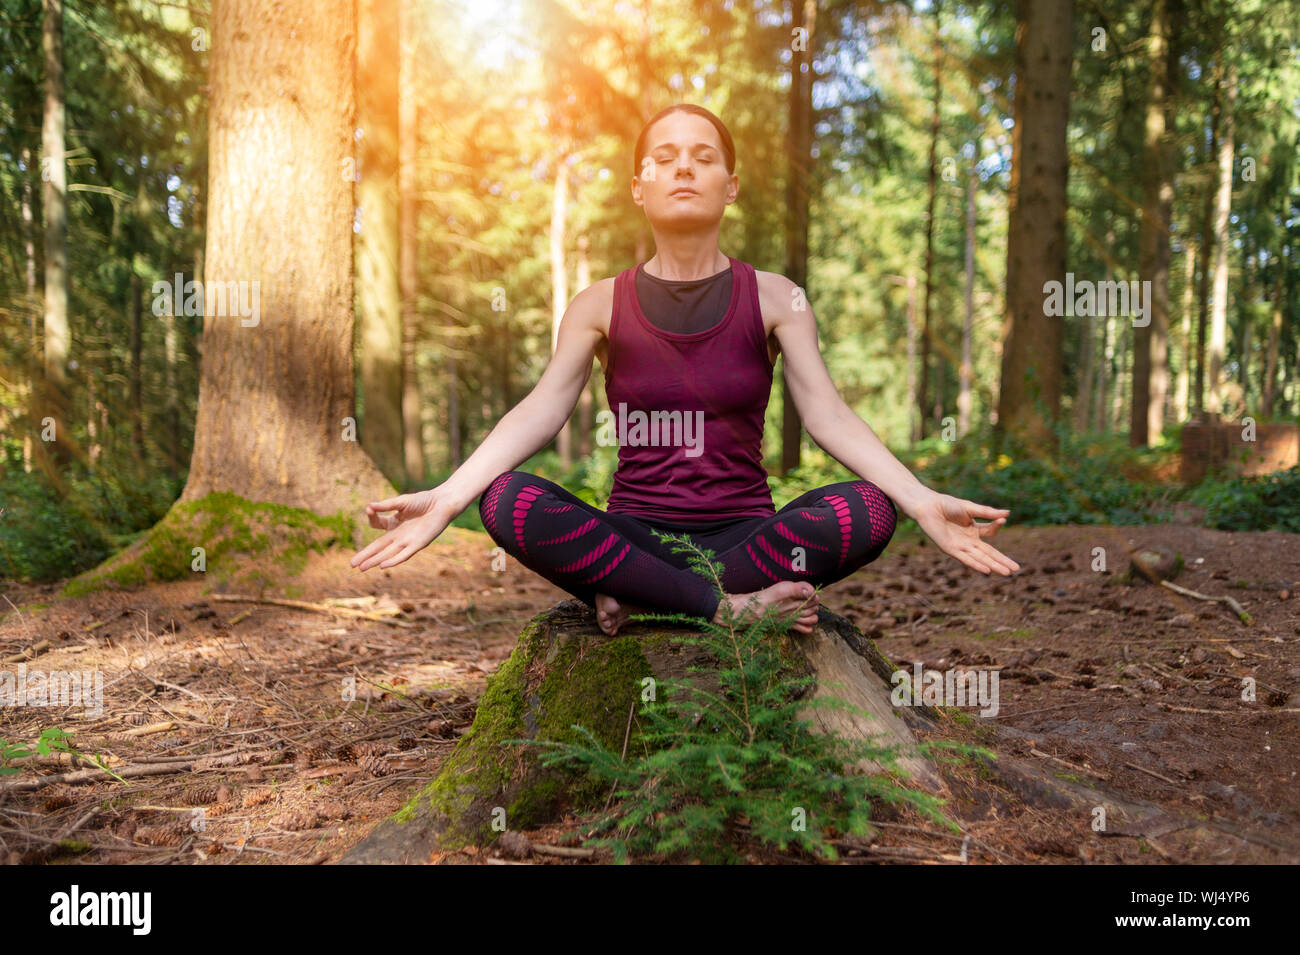 woman sitting on a tree stump in a forest meditating, practicing yoga. Stock Photo